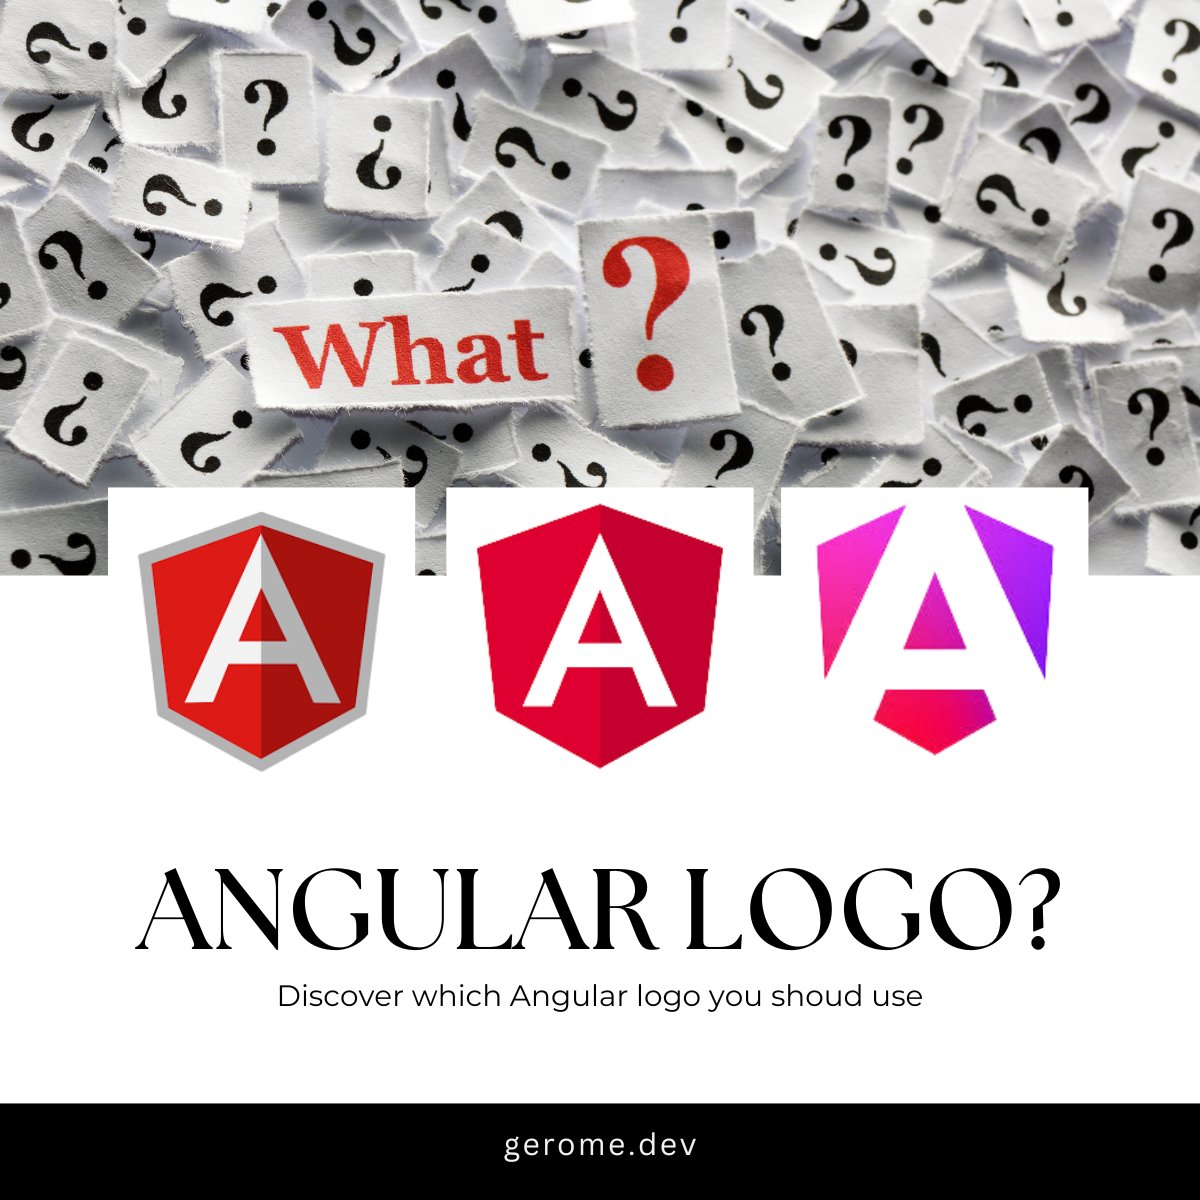 Need an Angular logo to illustrate some content? Don't get it wrong and ruin it by choosing the wrong one!

The first one is NOT about Angular but AngularJS.
Angular released the last logo in November 2023: choose it to show you are following the trends!